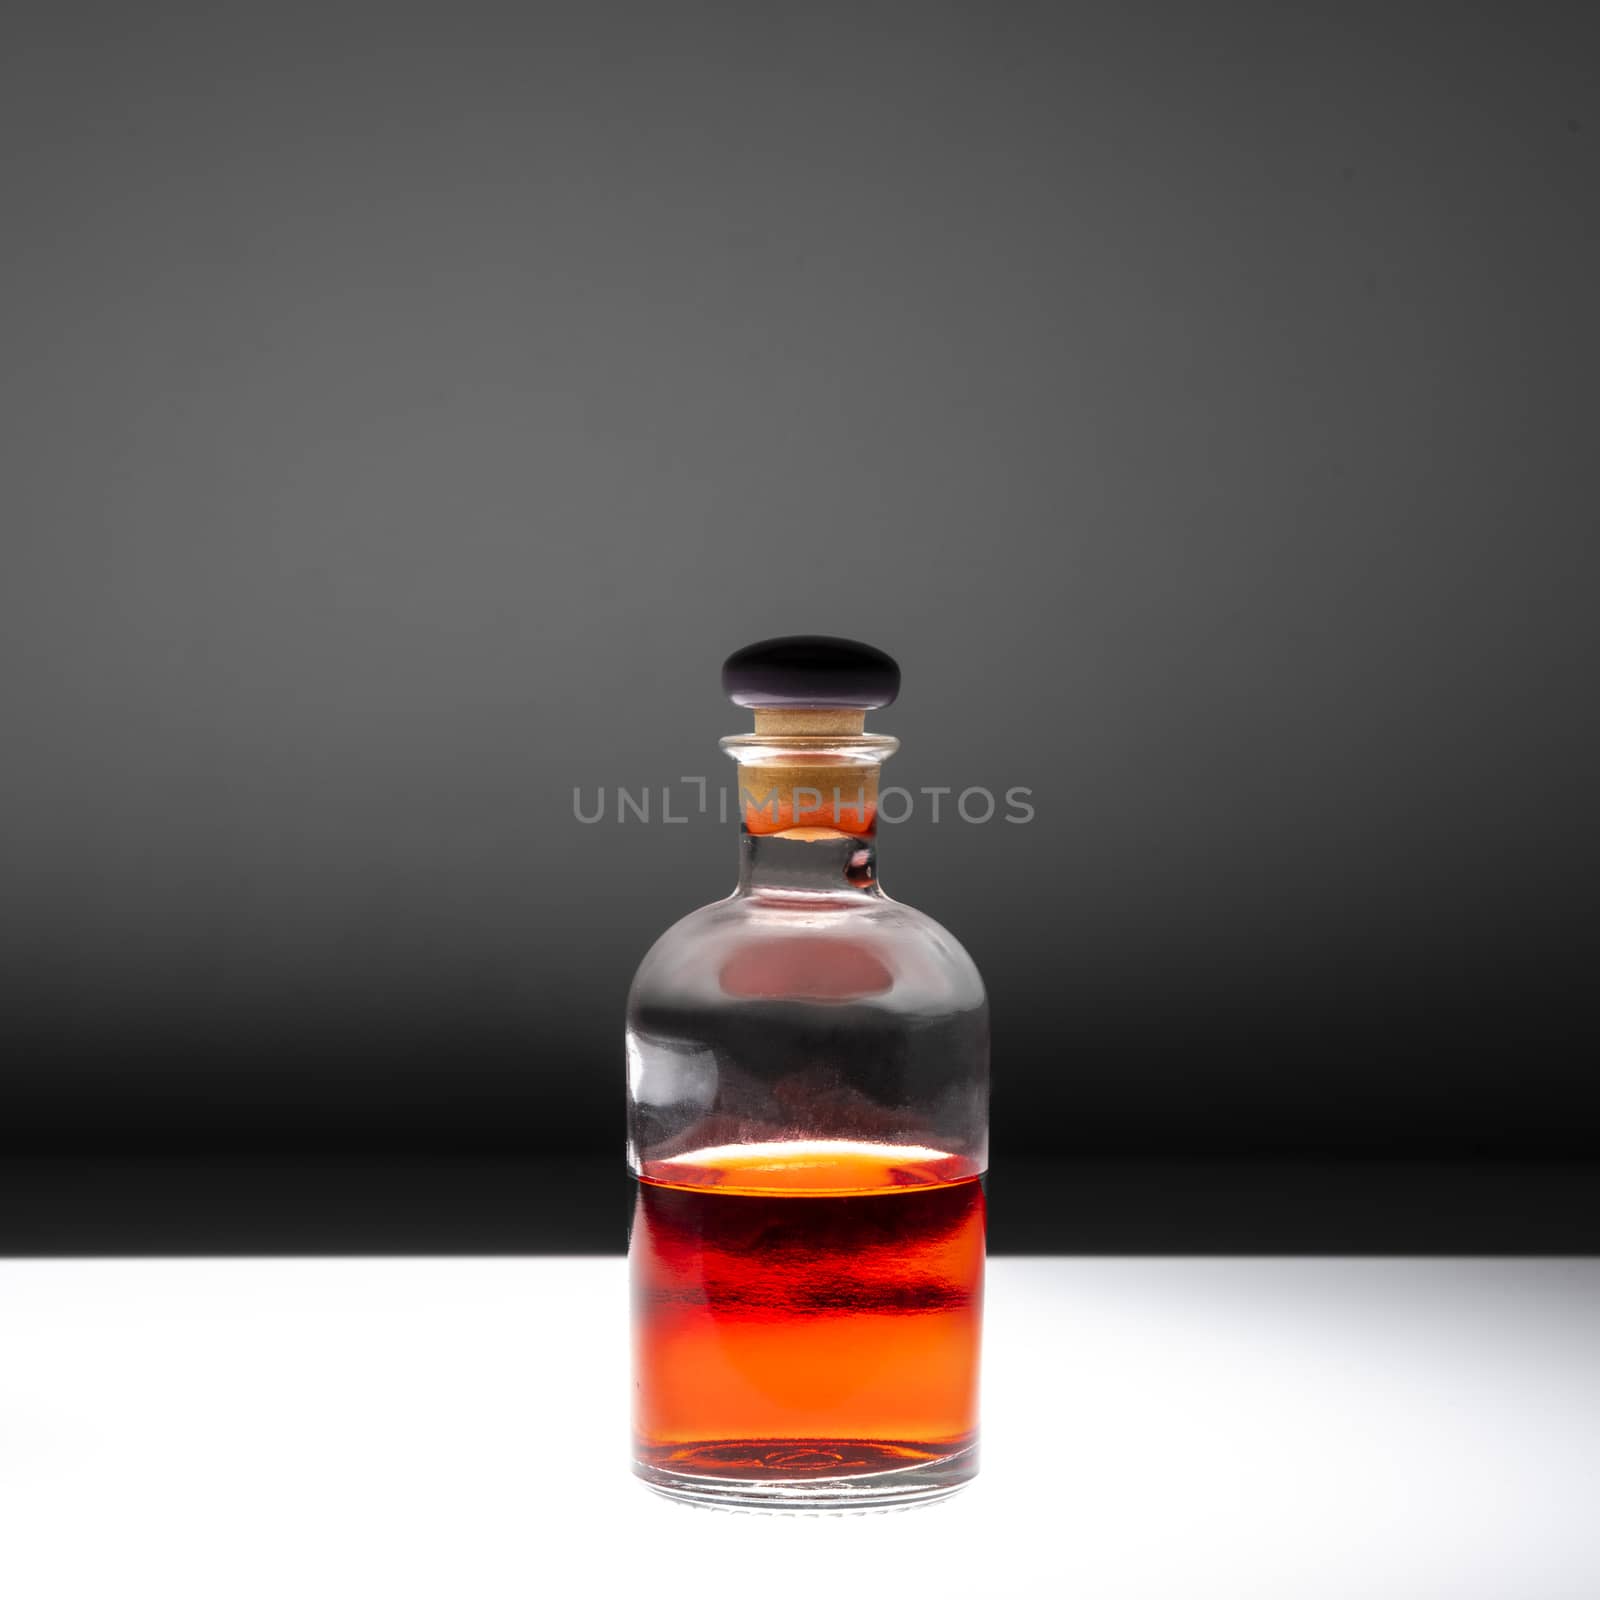 Small glass bottle containing red liquid